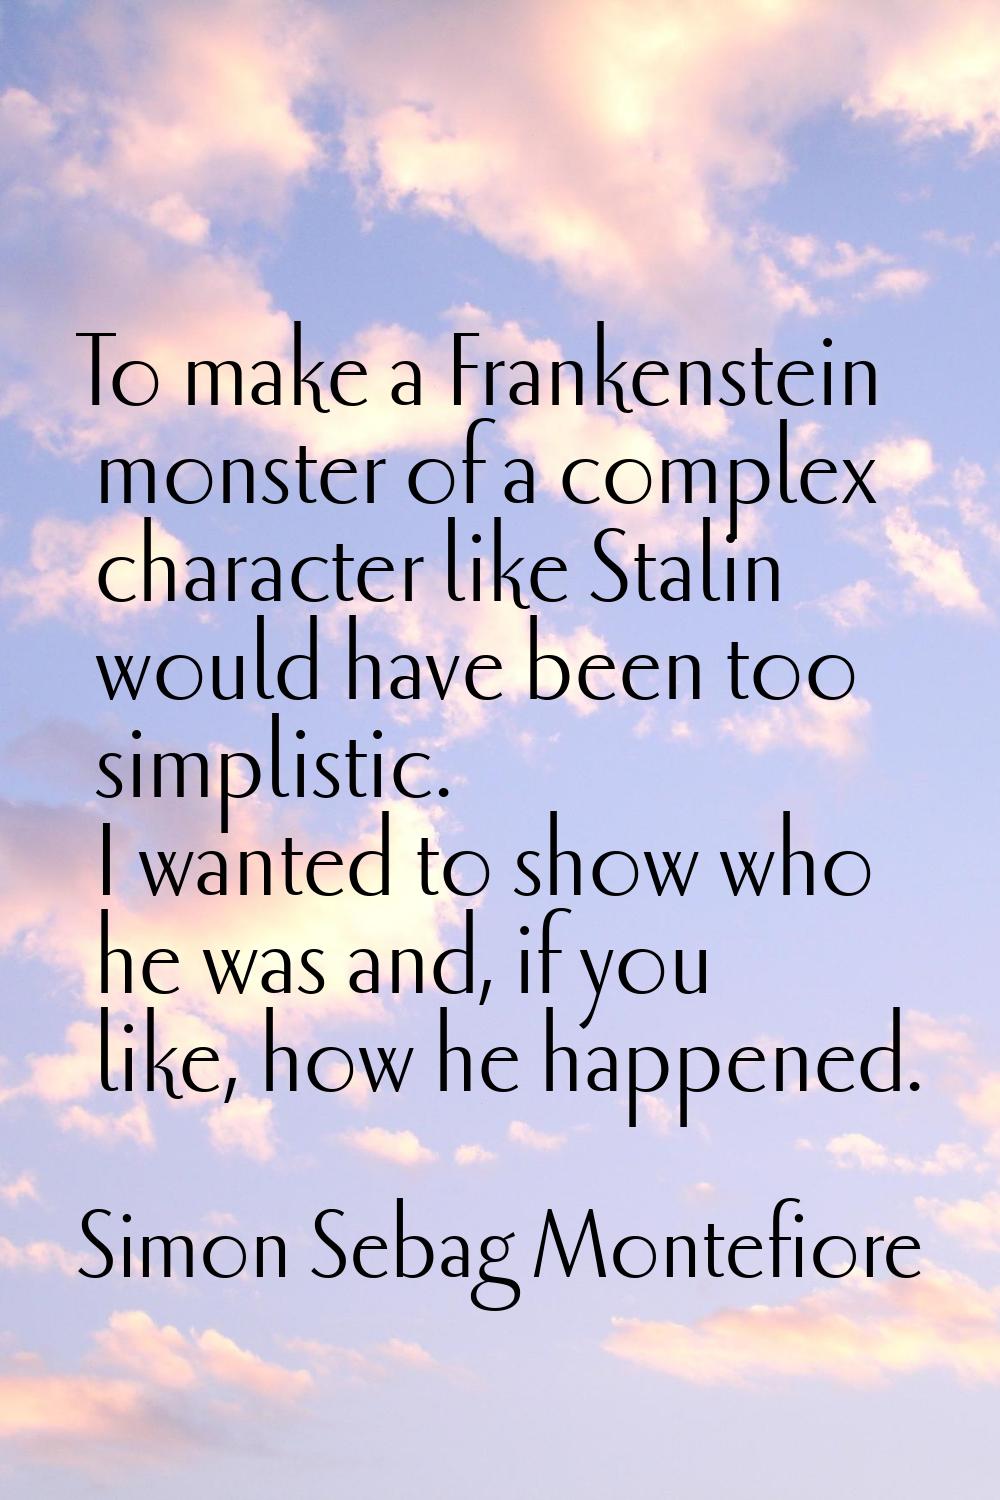 To make a Frankenstein monster of a complex character like Stalin would have been too simplistic. I